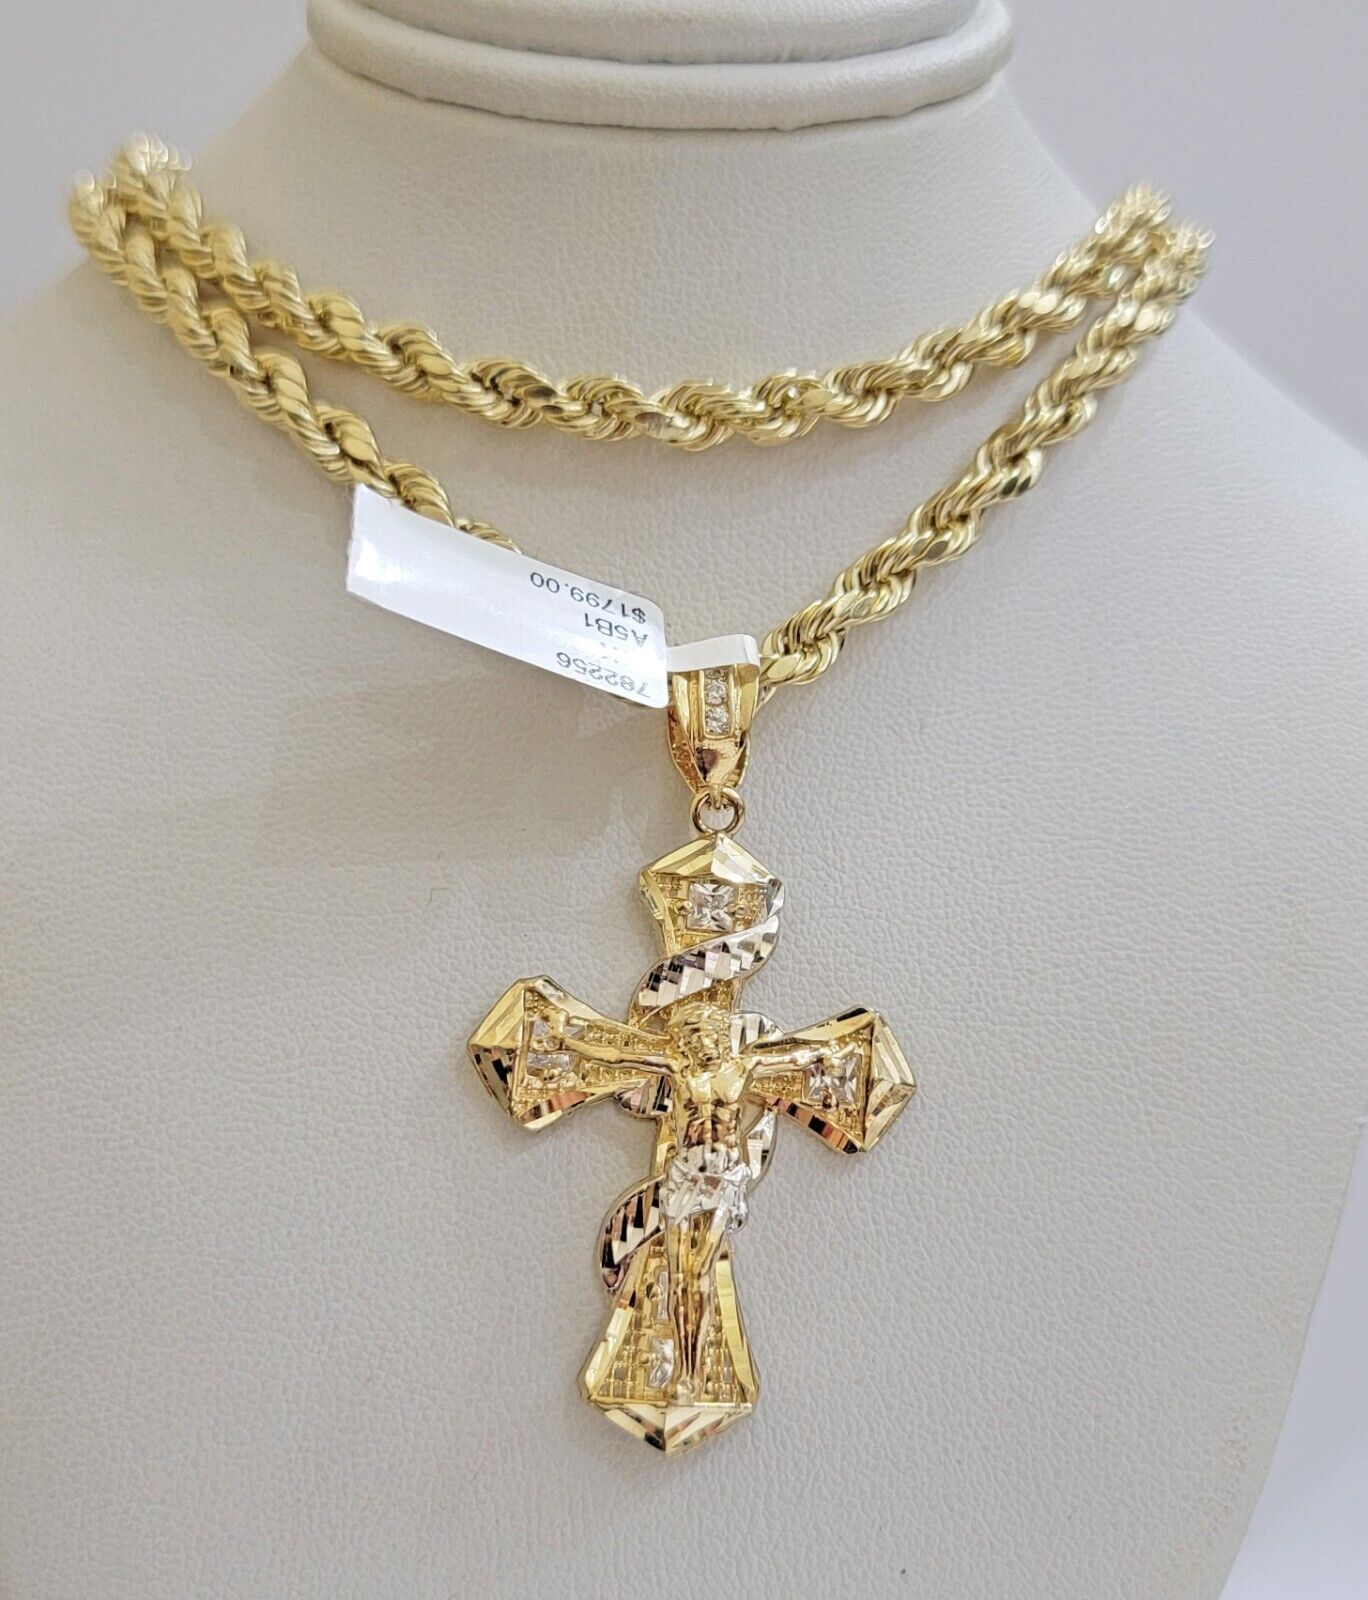 10k Gold Rope Chain Necklace Jesus Cross Charm Pendant Set 18-28" inch 5mm, REAL